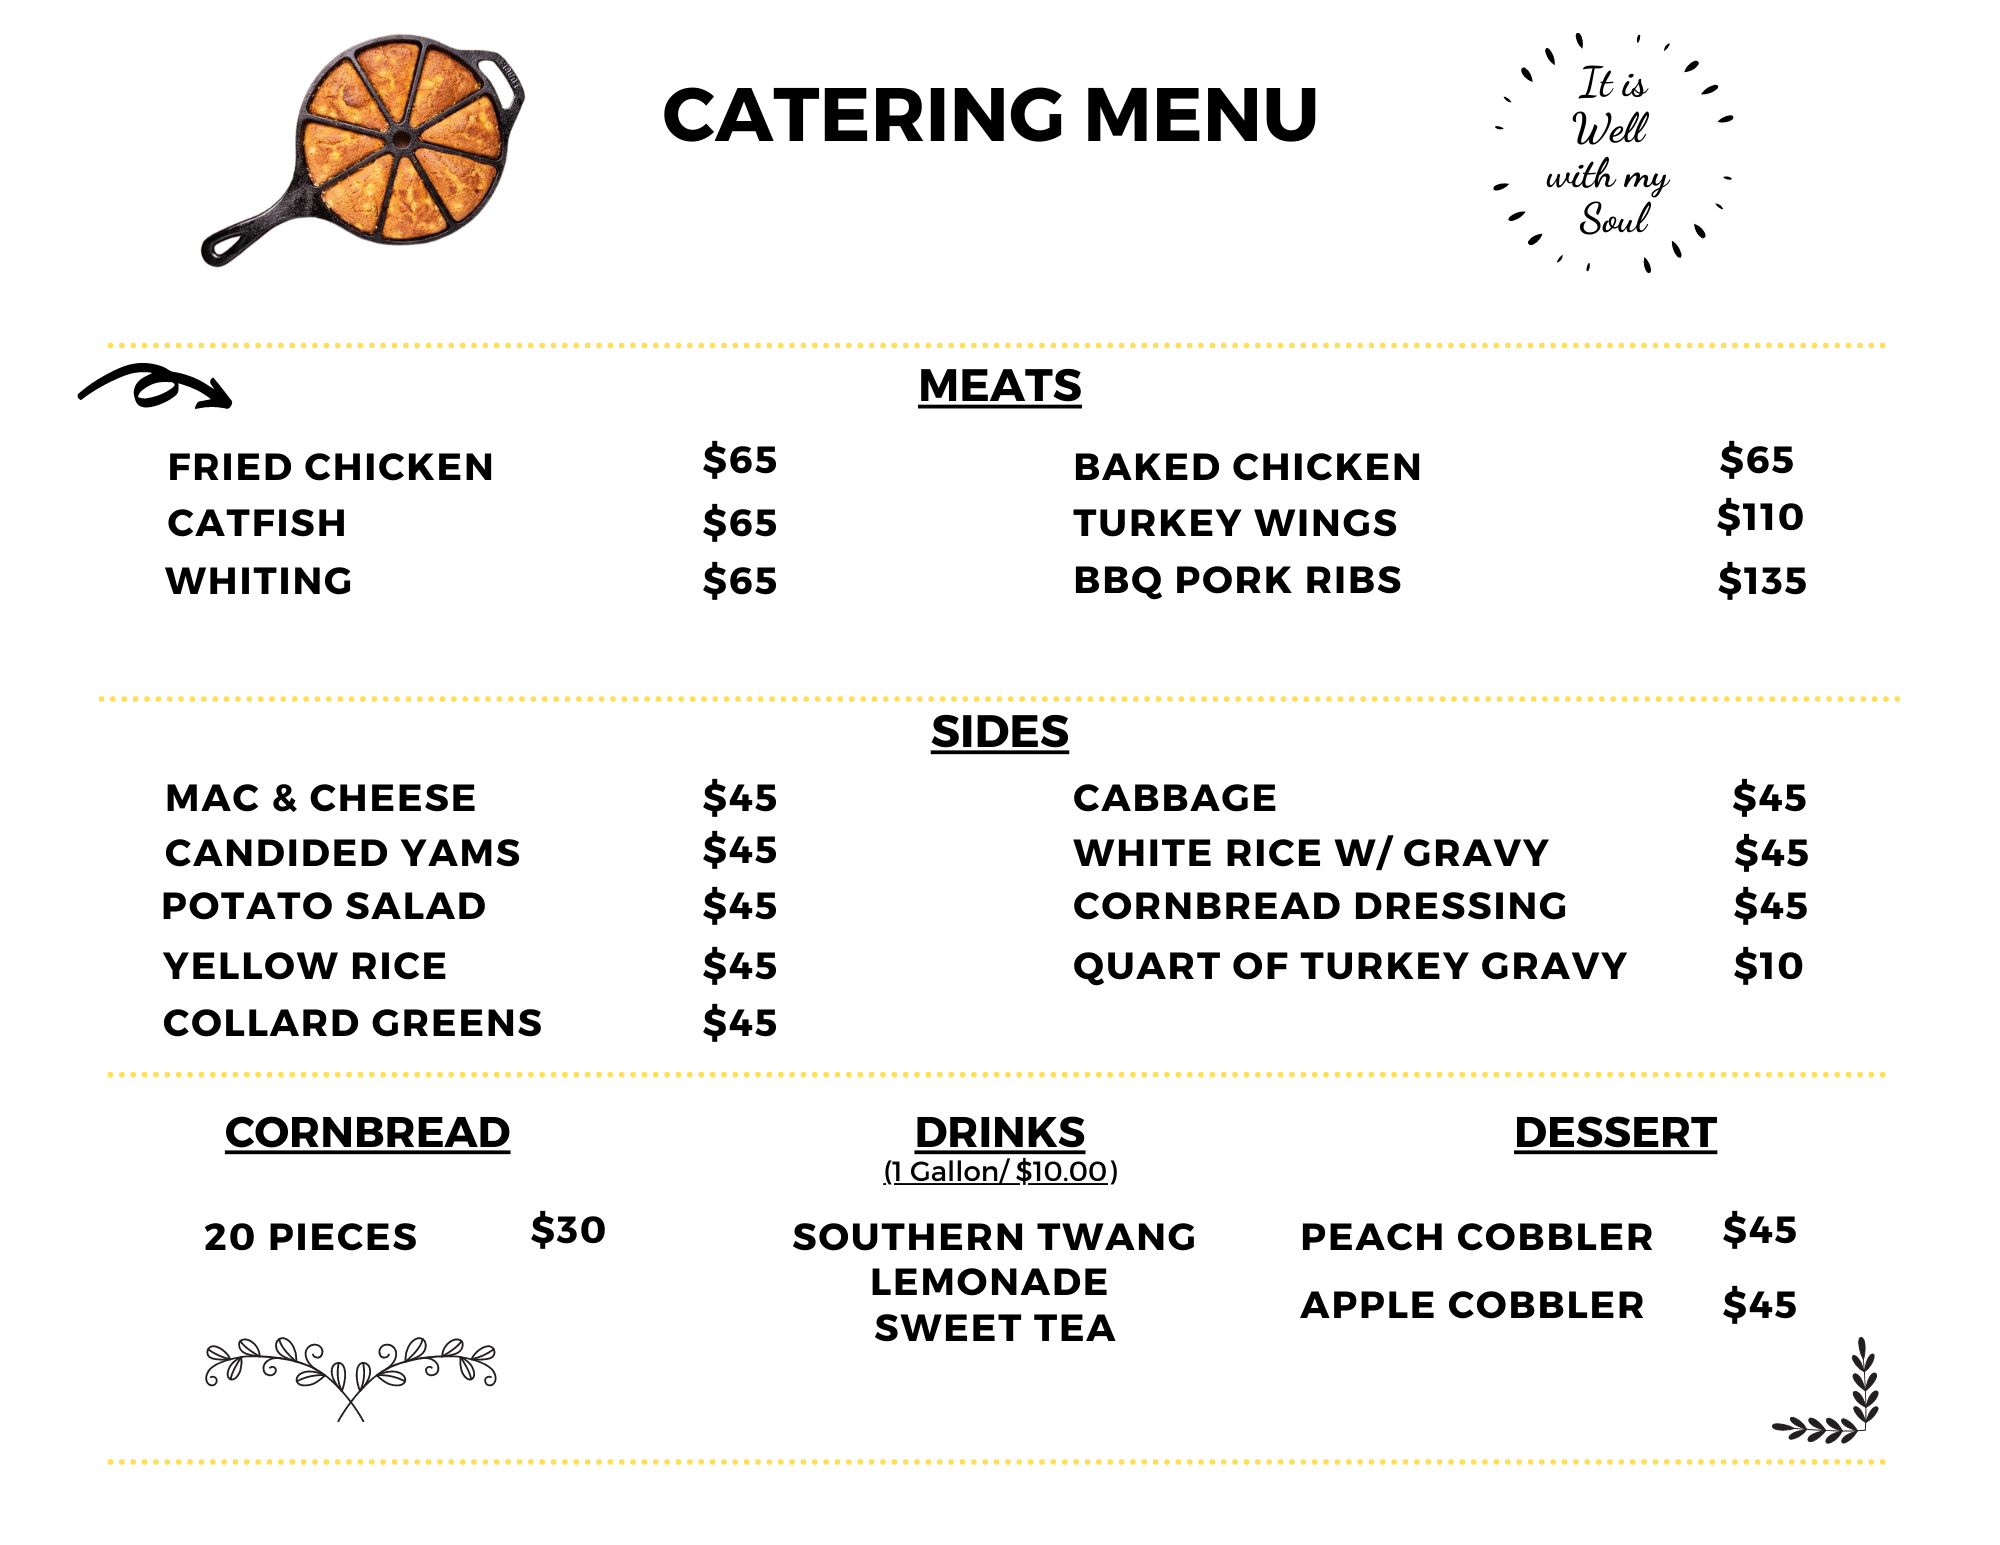 Fay's restaurant and catering menu